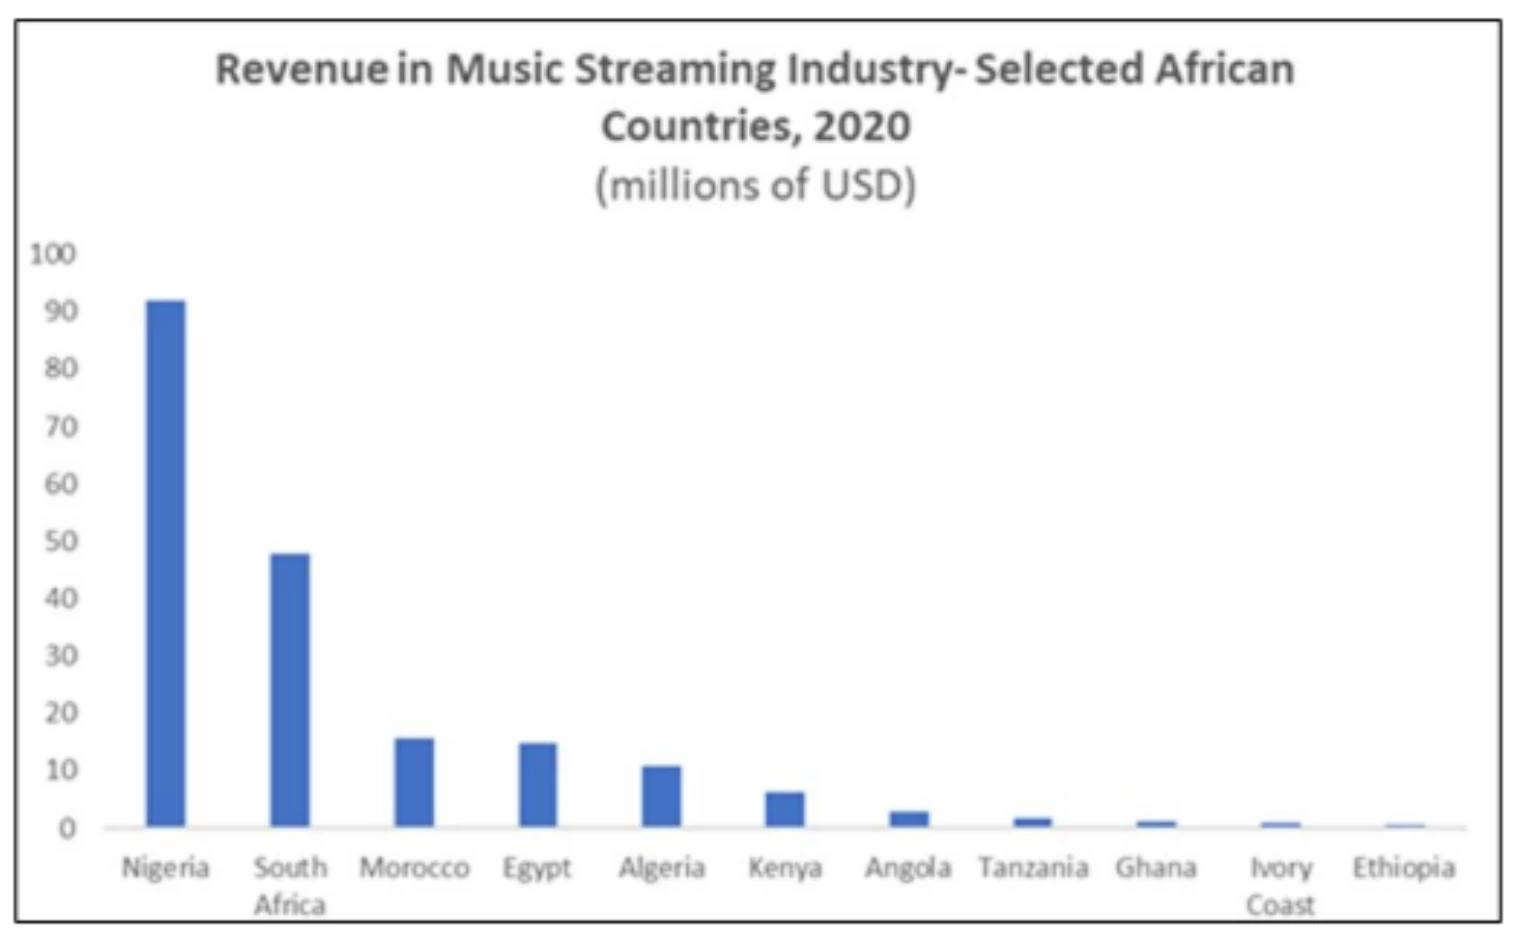 Cross country comparison of revenues from music streaming by country. 